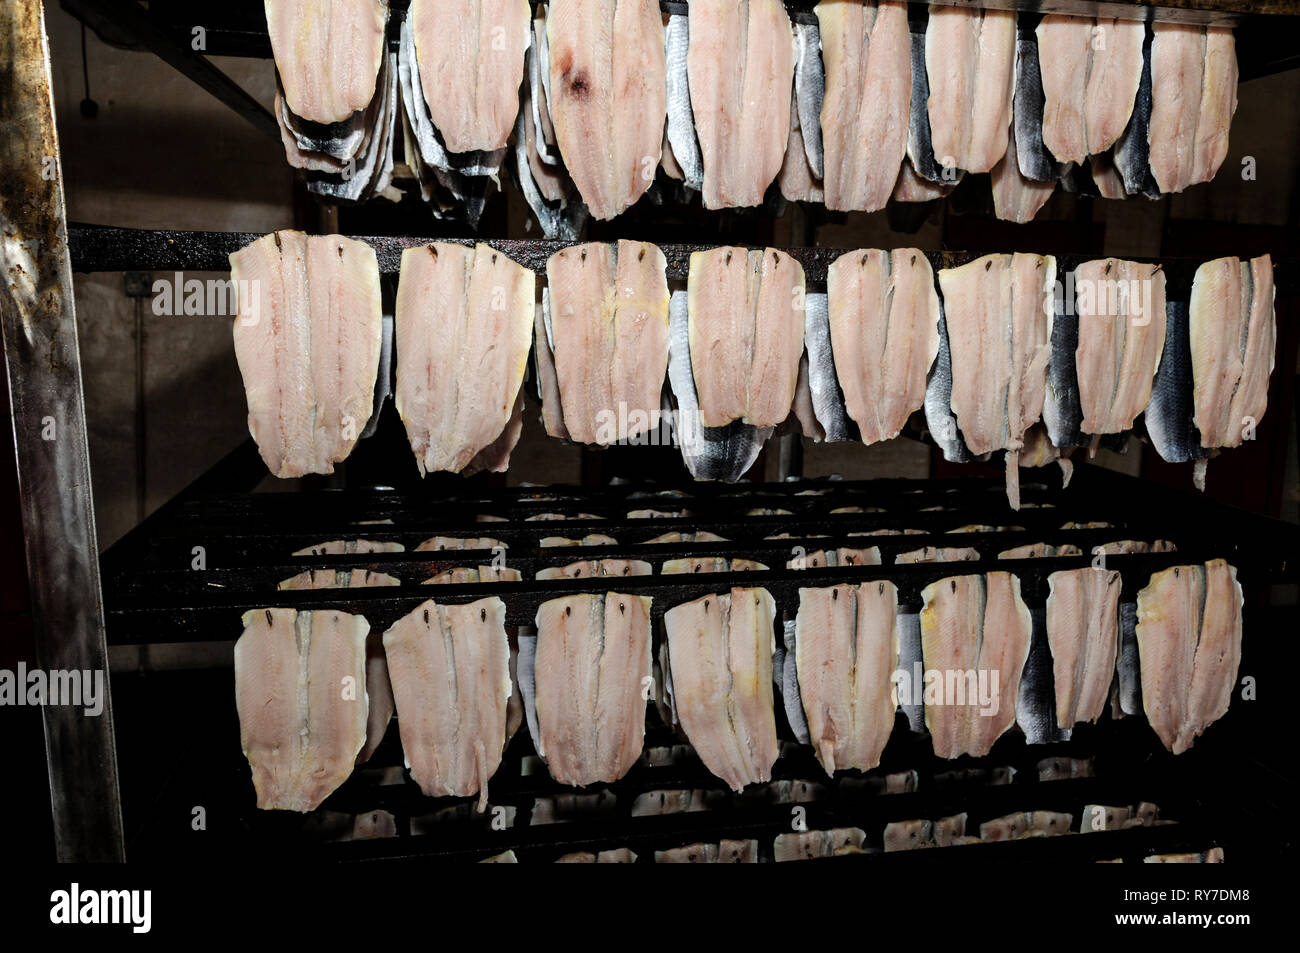 Raw kippers being prepared for smoking at Moors Kippers, a family business since 1770, in Peel on the west coast of the Isle of Man, Britain.   A few  Stock Photo